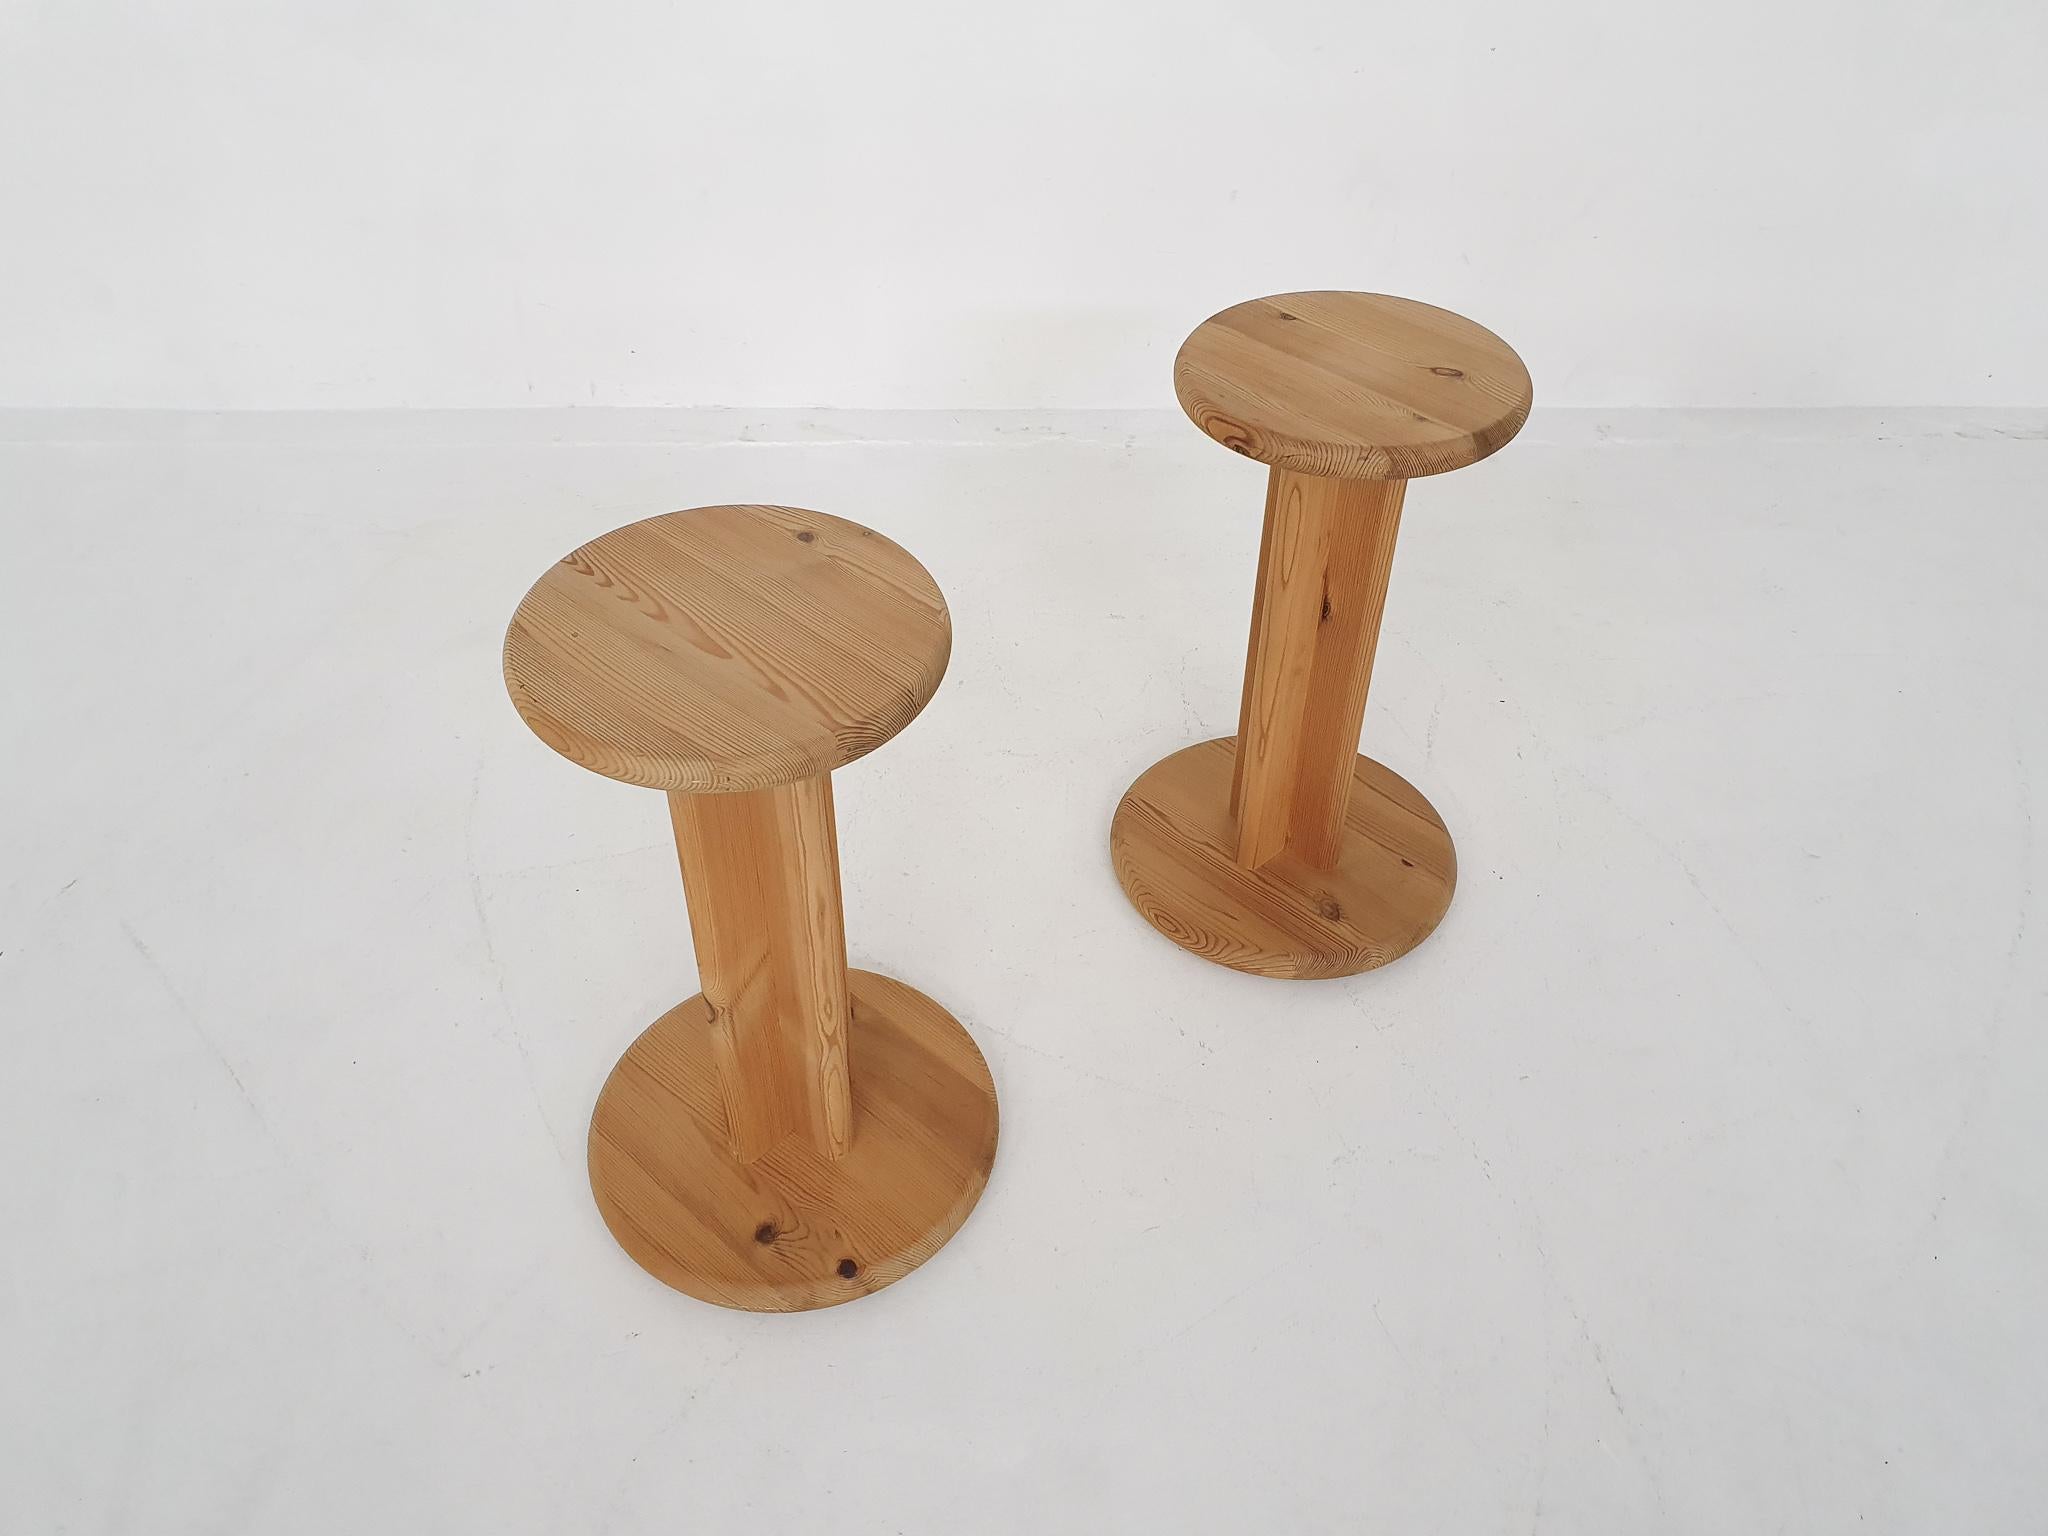 Pinewood side tables, stools or plant stands
Marked with 